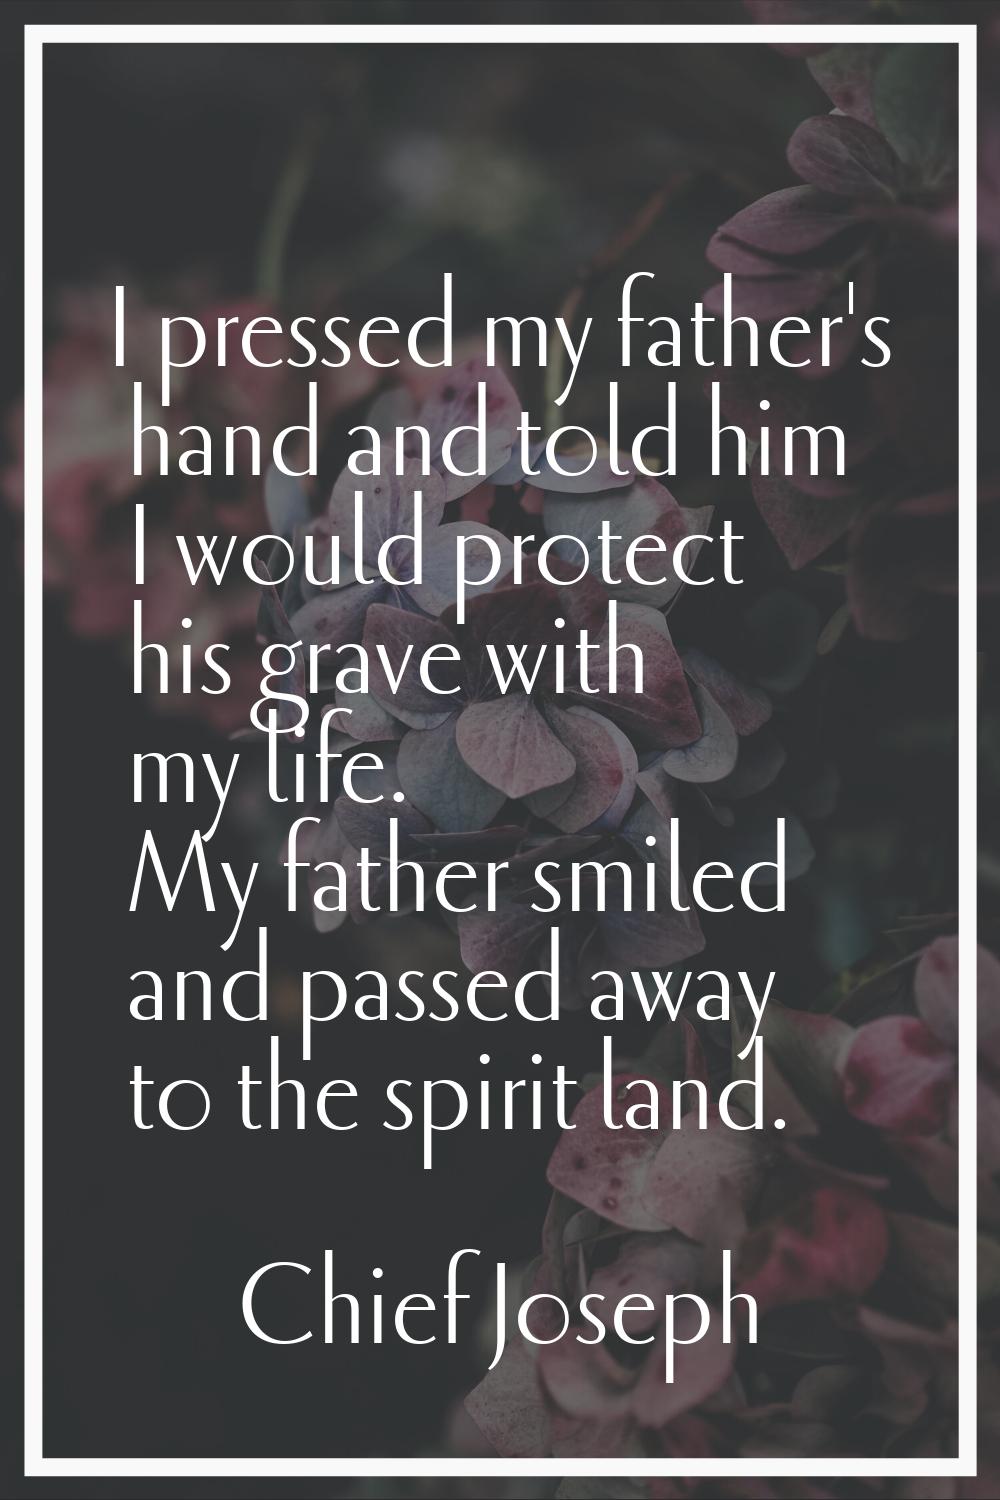 I pressed my father's hand and told him I would protect his grave with my life. My father smiled an